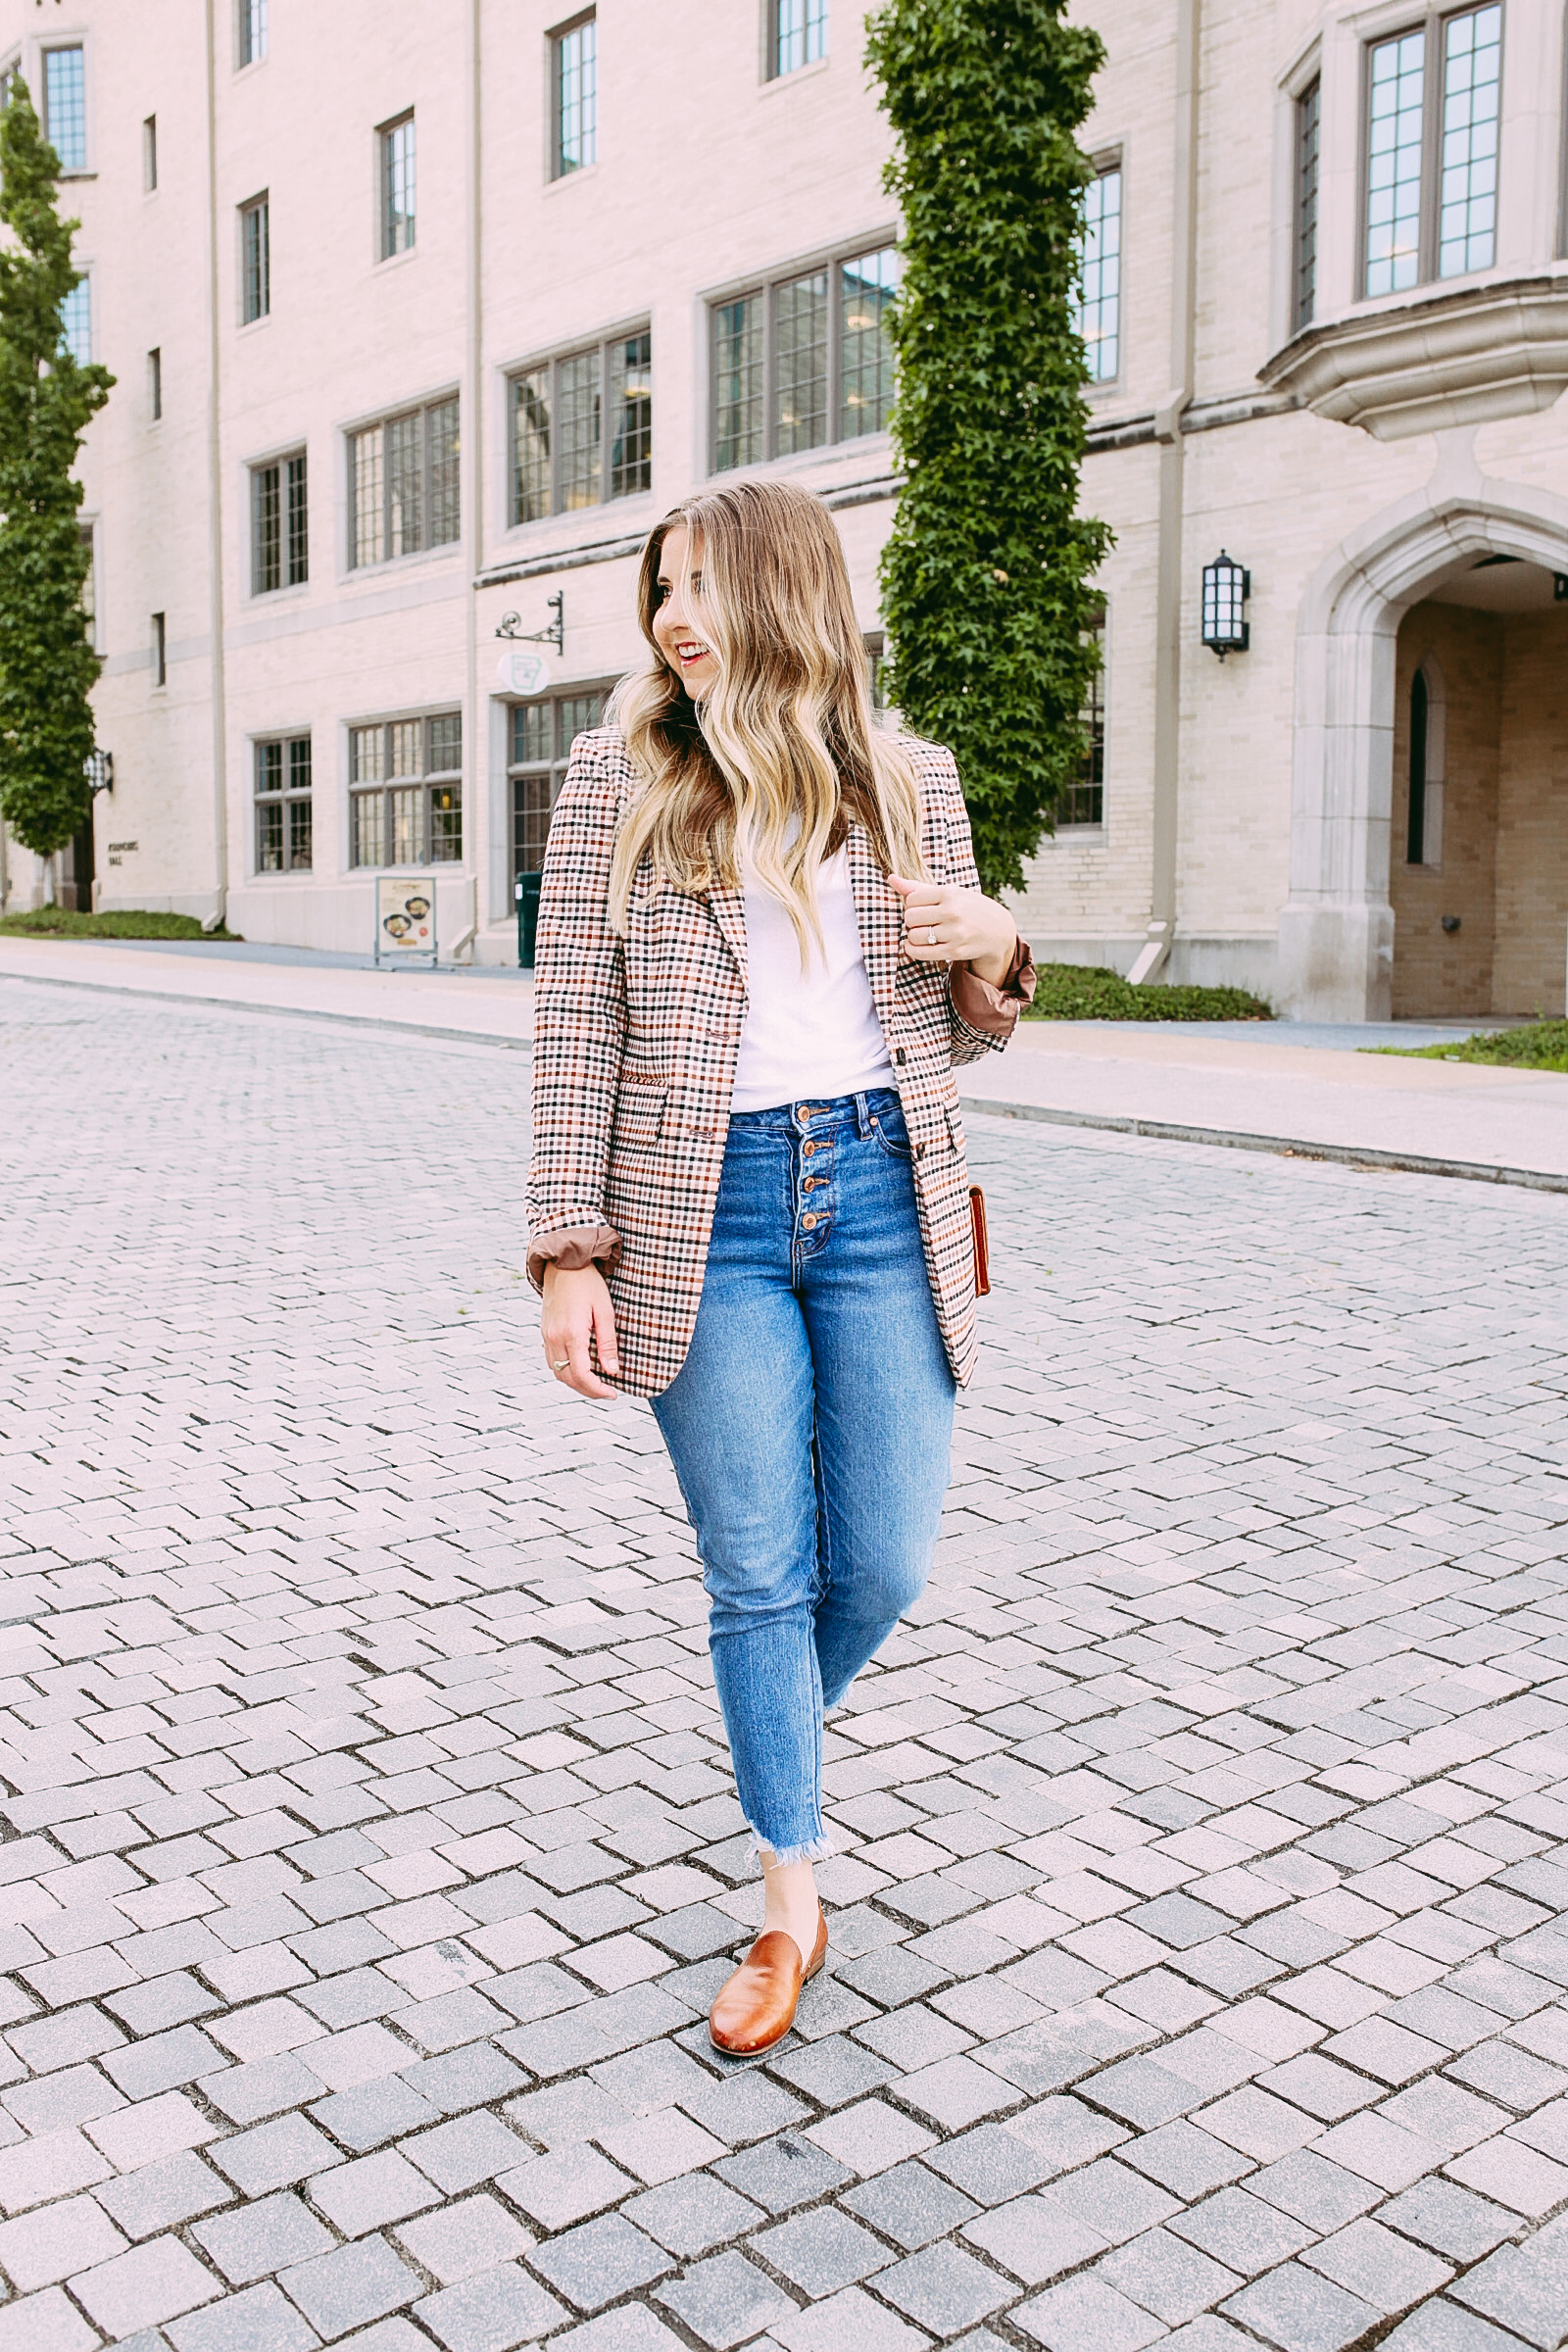 Elevate Your Office Look: Stylish Ways for Women to Wear Jeans at Work —  Autum Love